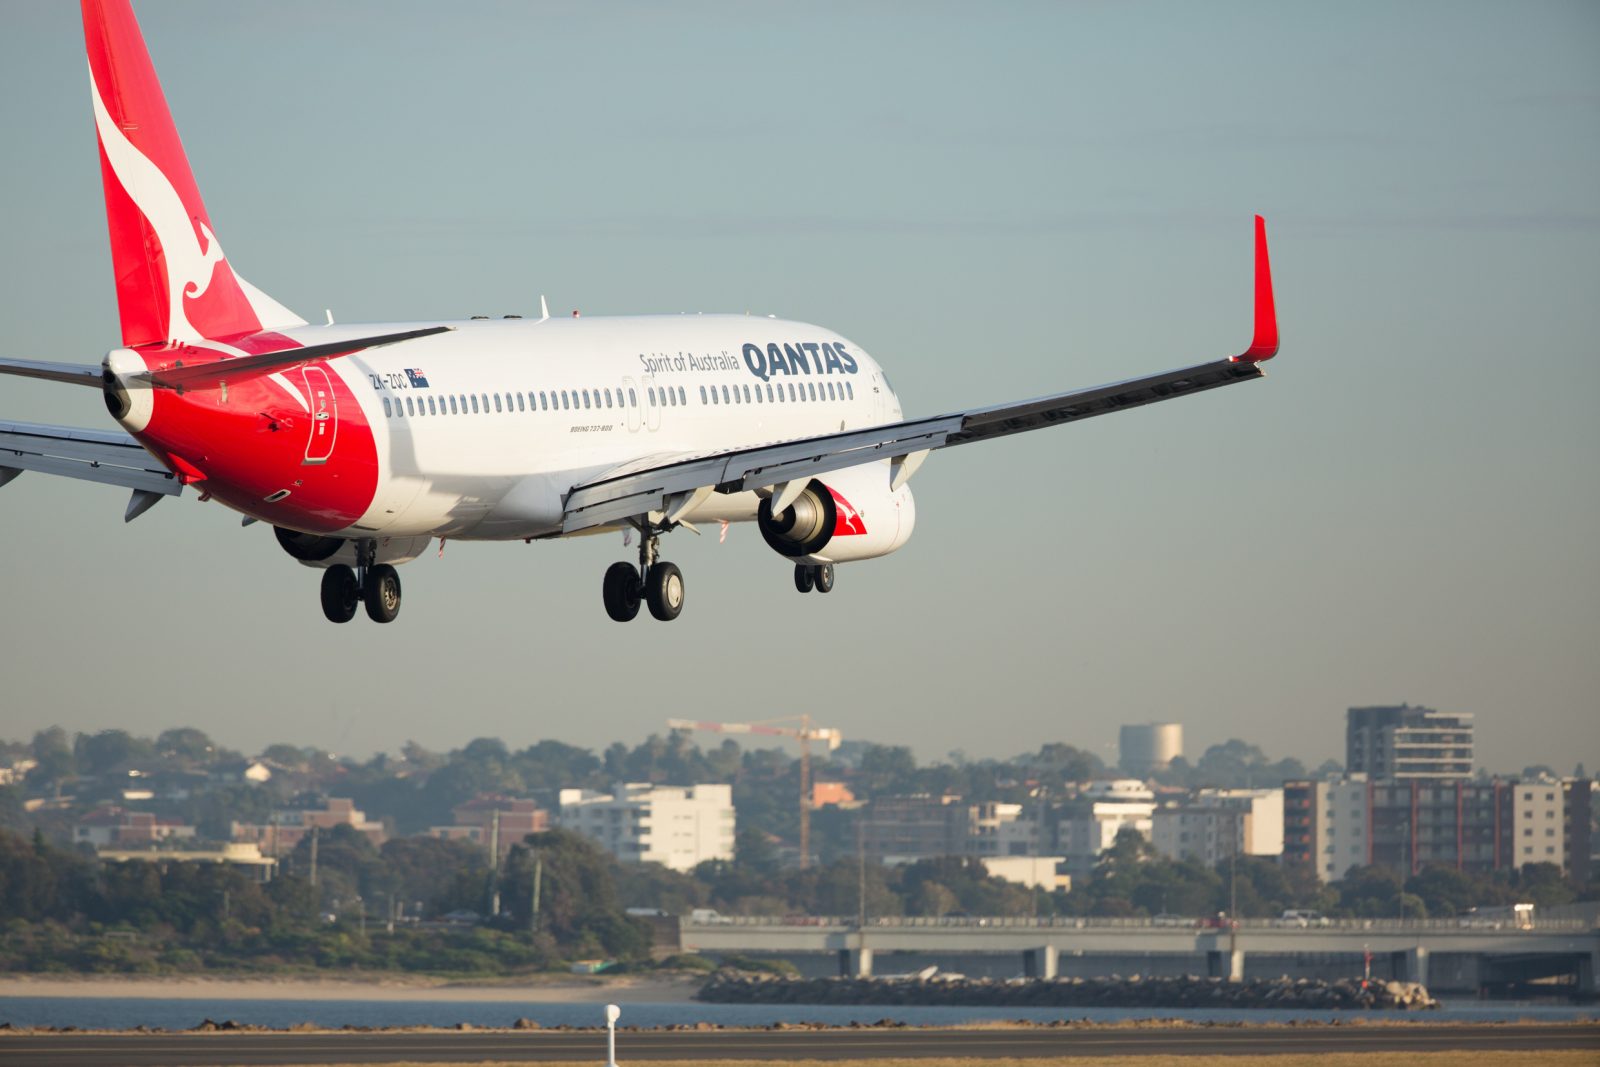 Qantas Has Been Accused of "Fat Shaming" Passenger - Here's Why He is Wrong